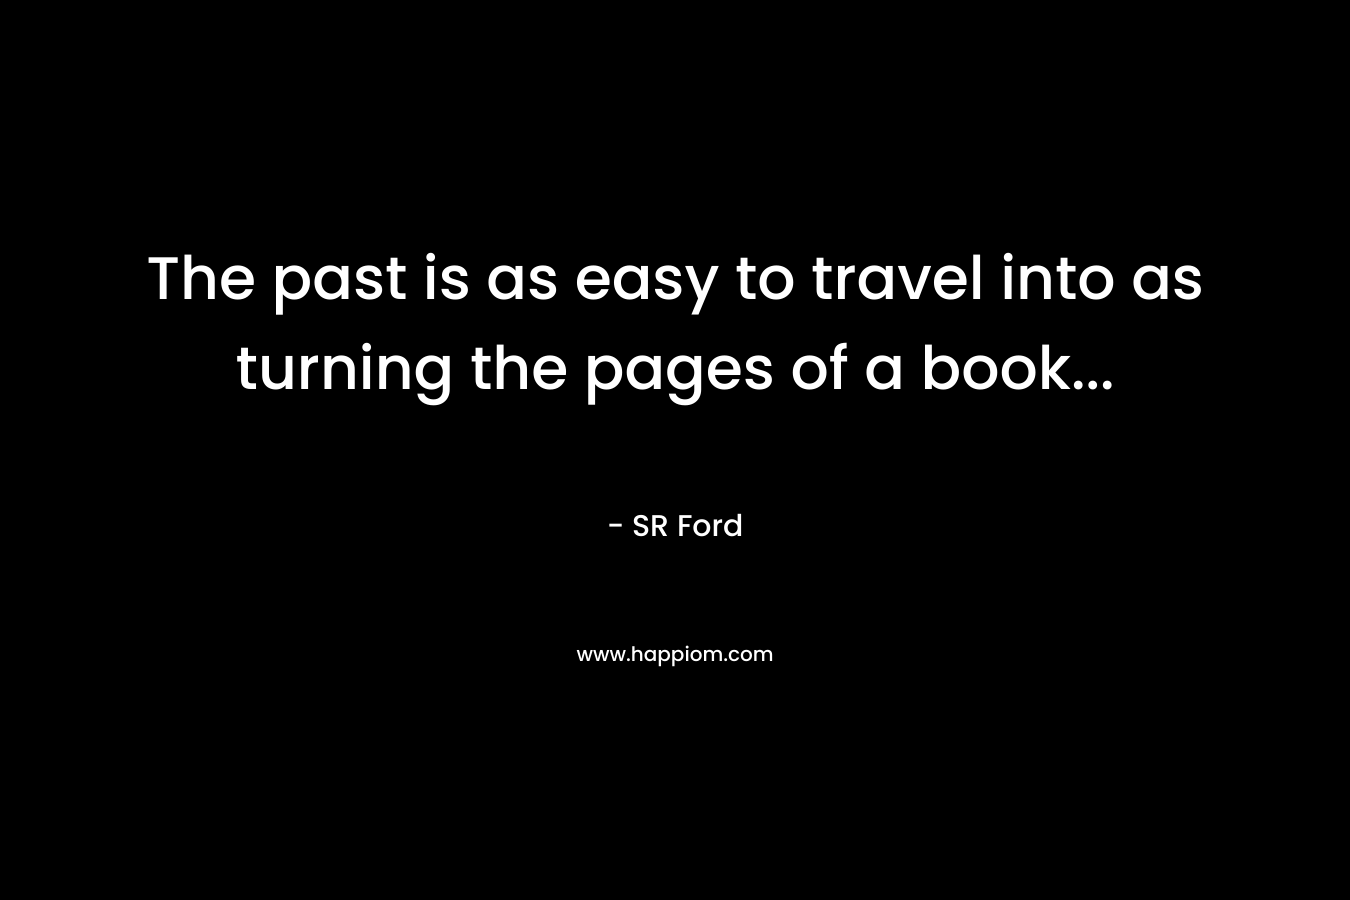 The past is as easy to travel into as turning the pages of a book...